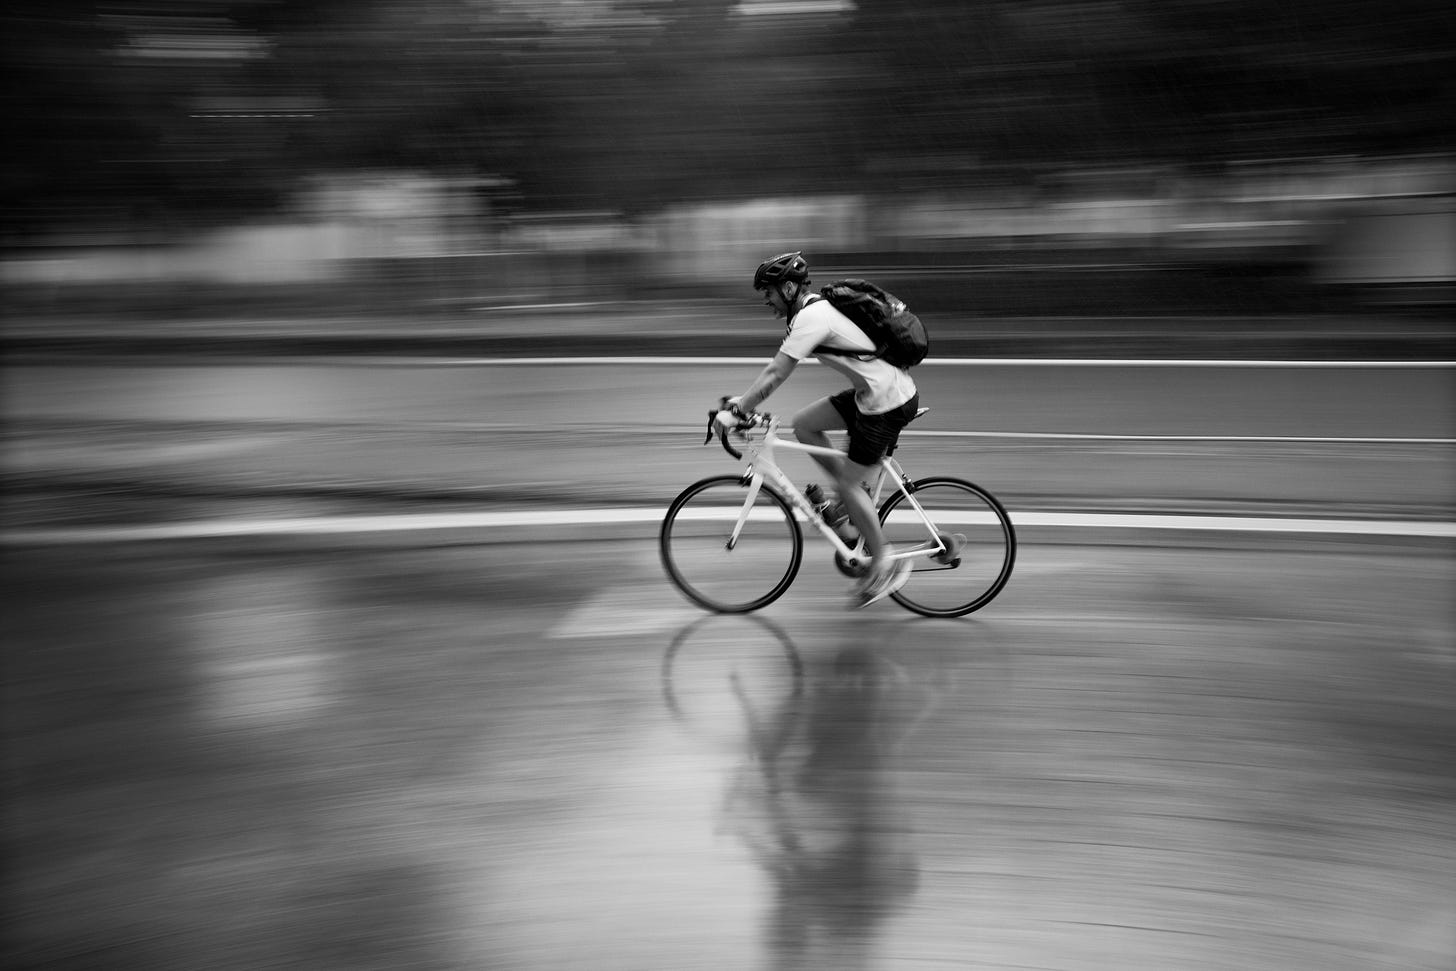 A black-and-white image of a commuter on a white road bike peddling furiously through the rain.